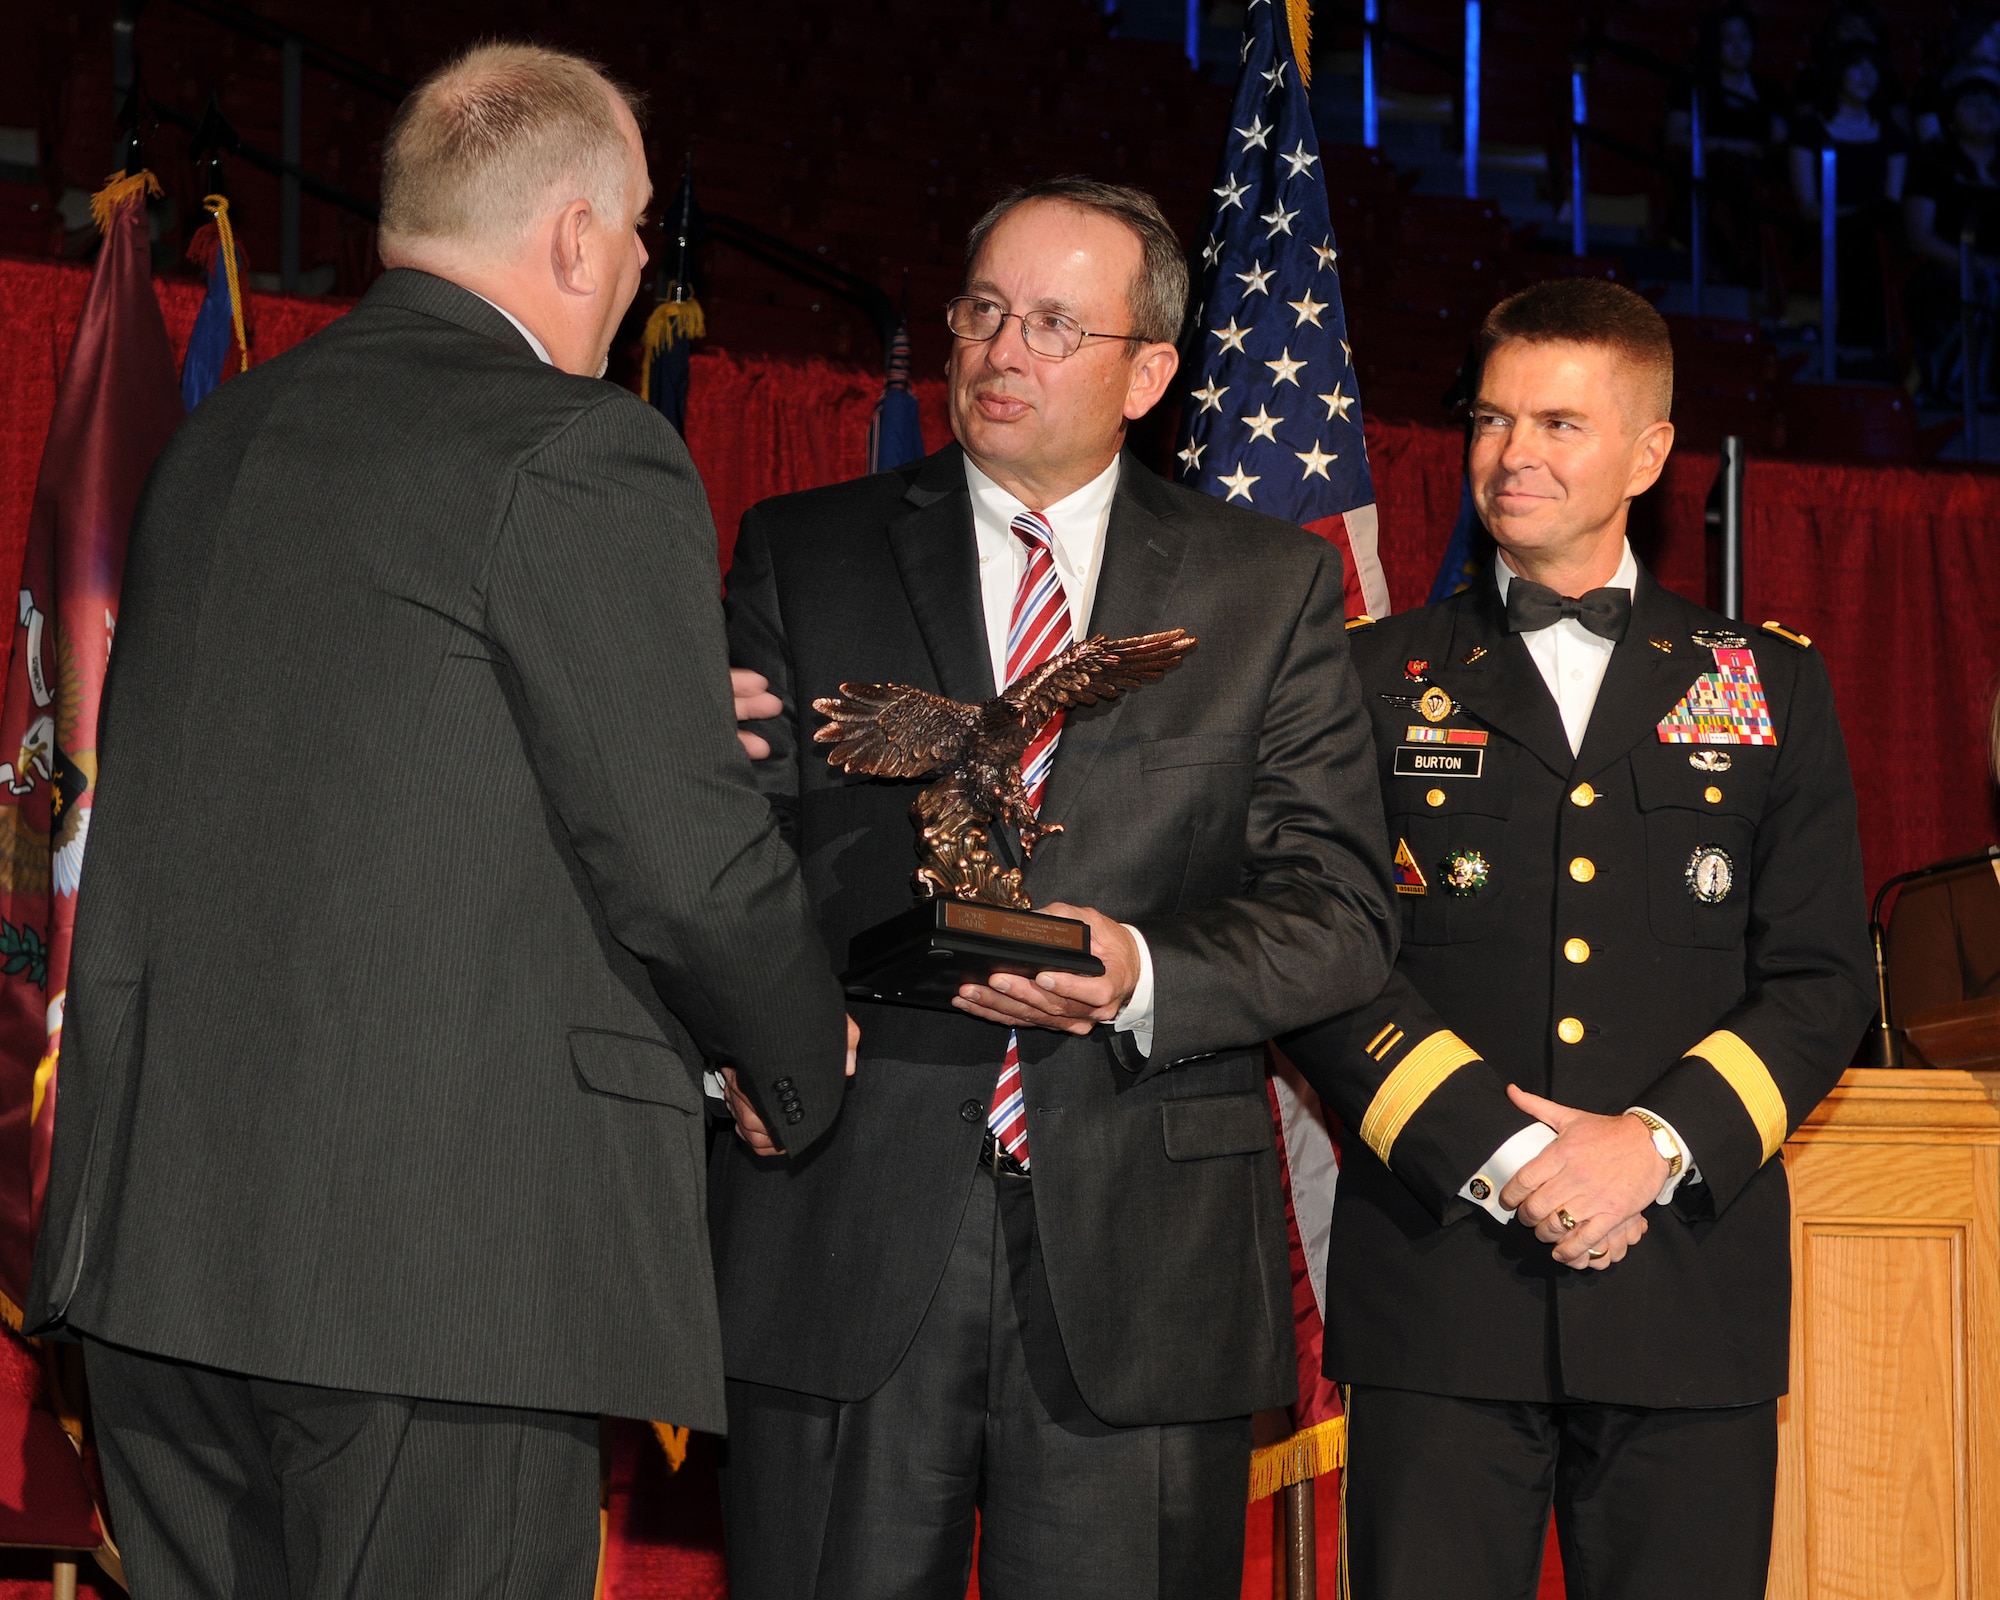 Retired Maj. Gen. Brian Tarbet, the former adjutant general of the Utah National Guard, was awarded the Veterans Service Award by Zions Bank for his lifetime of service and support of military veterans during the 57th annual Veterans Day concert at the University of Utah's Jon M. Huntsman Center, on Nov. 10. (U.S. Air Force photo by Senior Airman Lillian Harnden)(RELEASED)